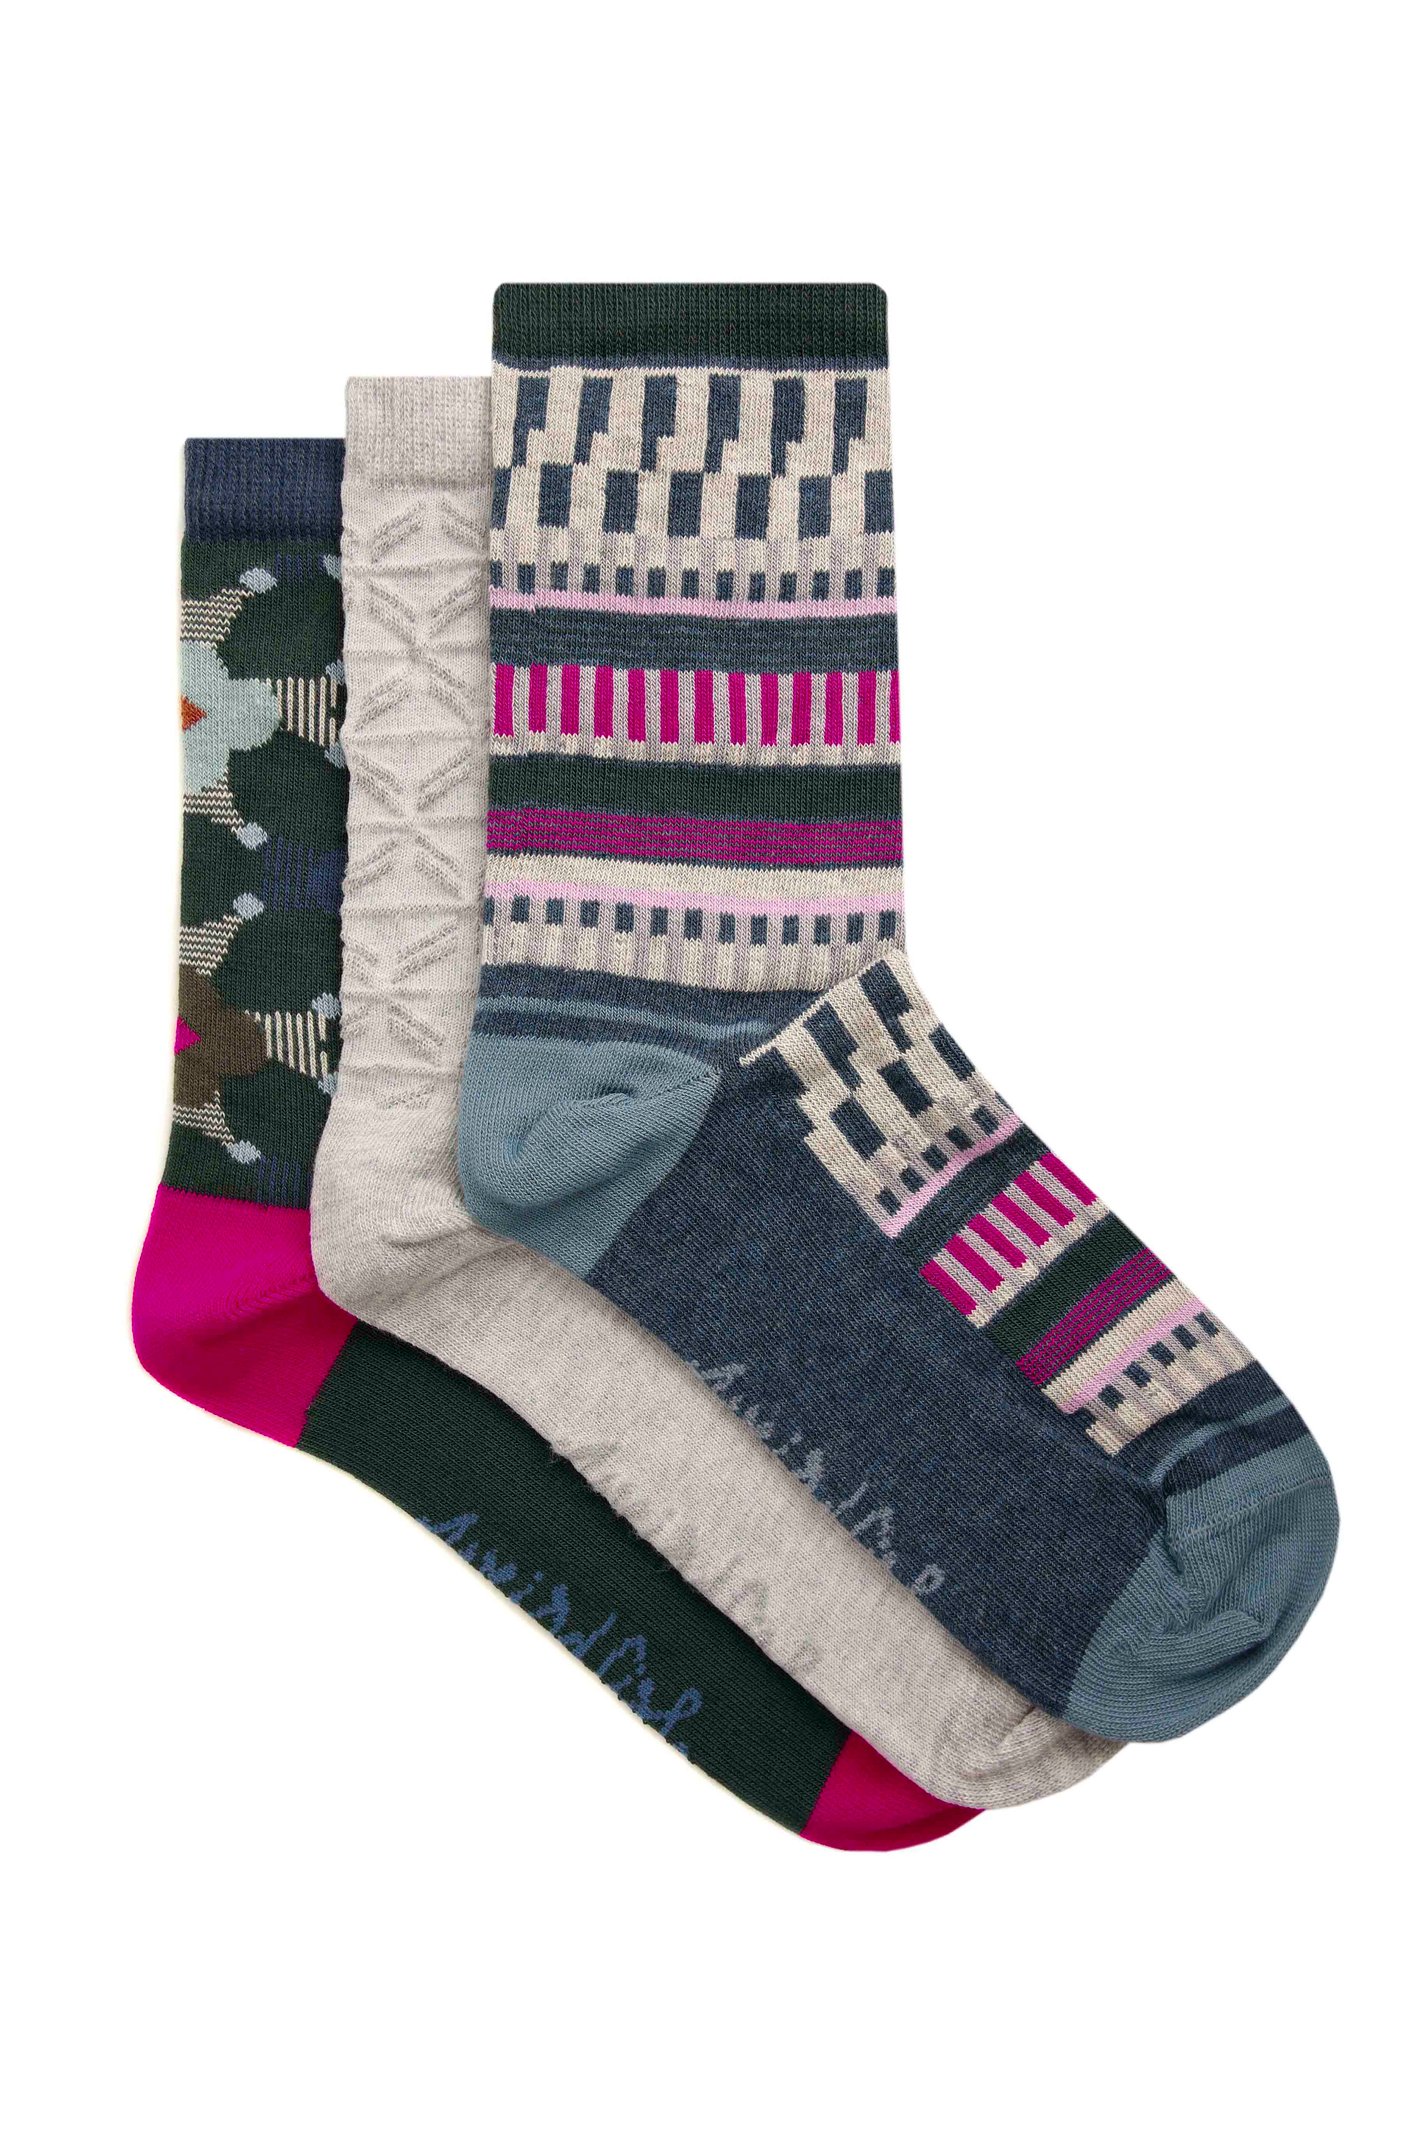 Weird Fish Parade Patterned Socks 3 Pack Magenta Size 4-7